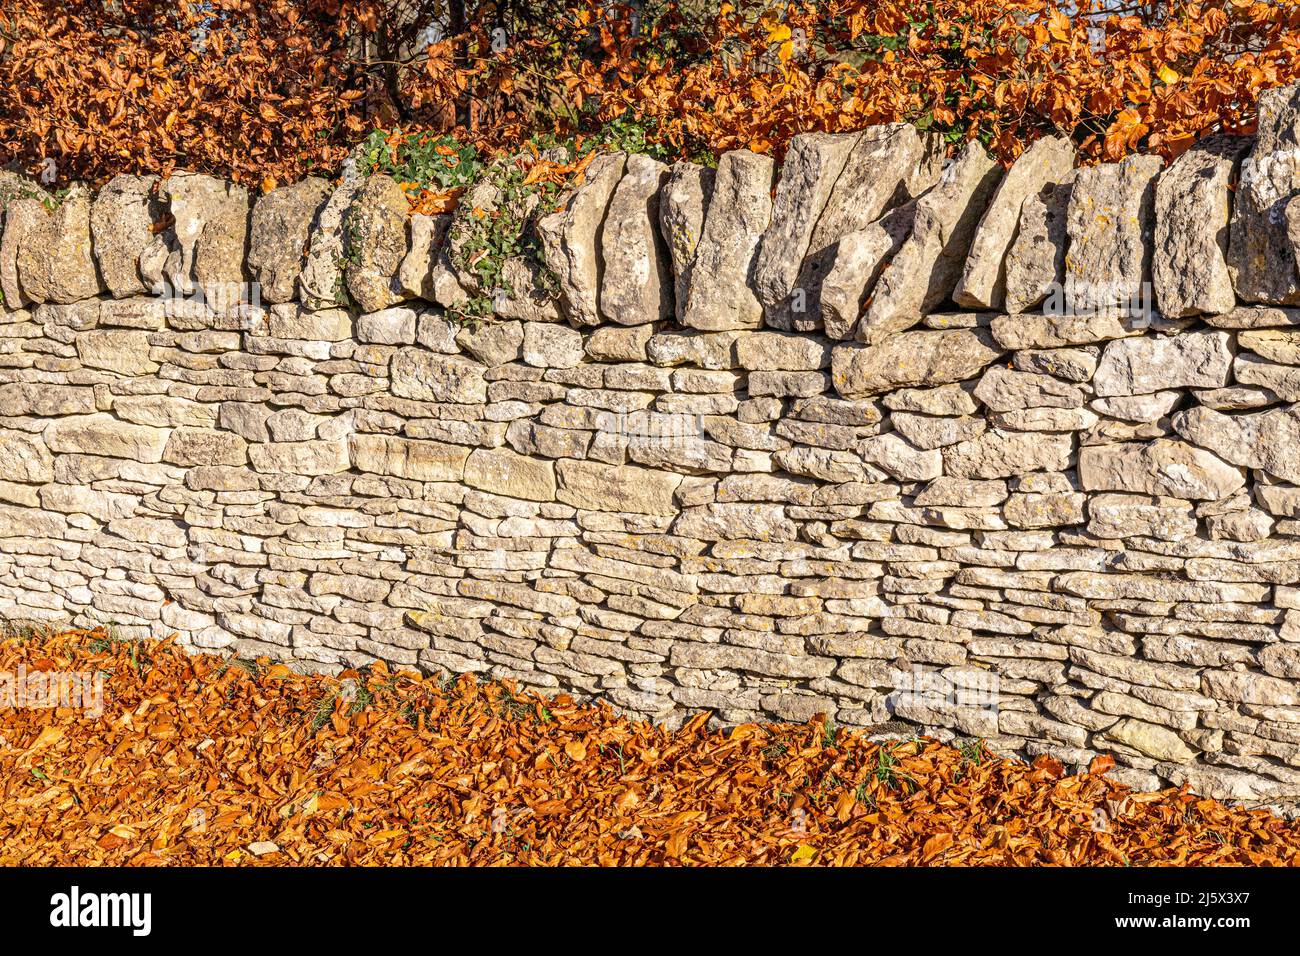 Autumn in the Cotswolds - A dry stone wall and beech leaves near the small town of Minchinhampton, Gloucestershire, England UK Stock Photo